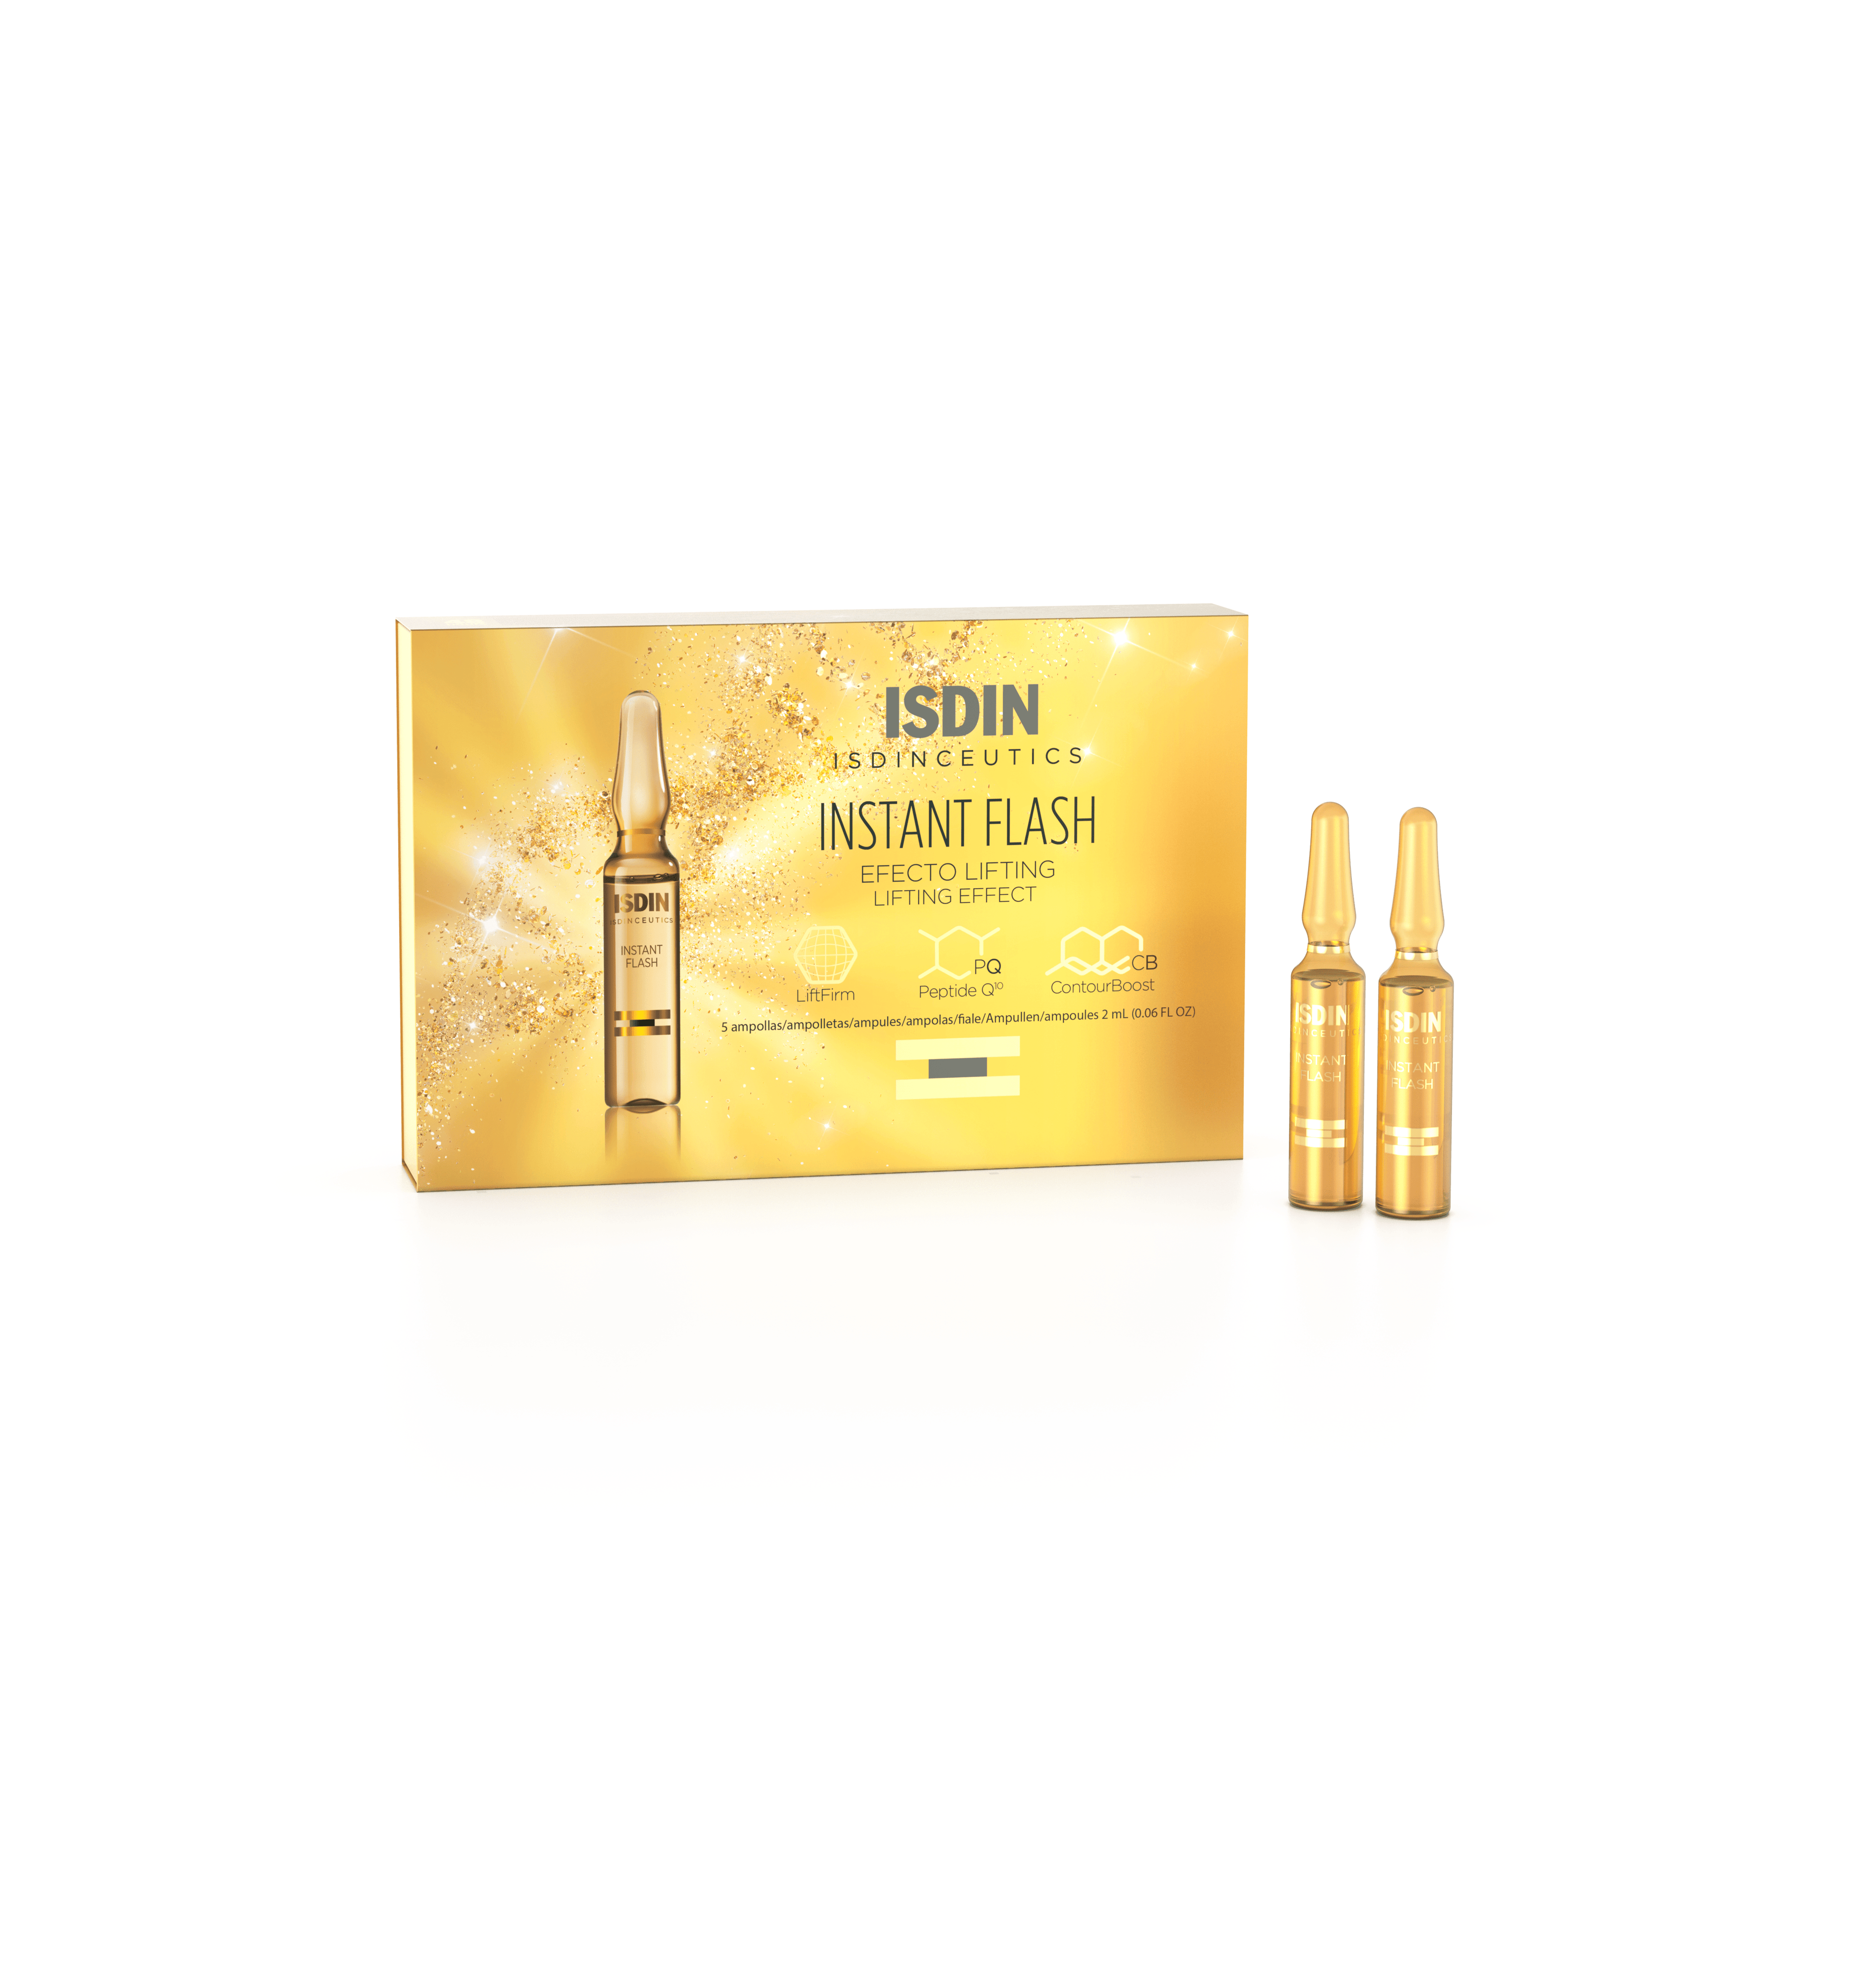 ISDIN® Instant Flash Lifting Effect Serum Ampoules